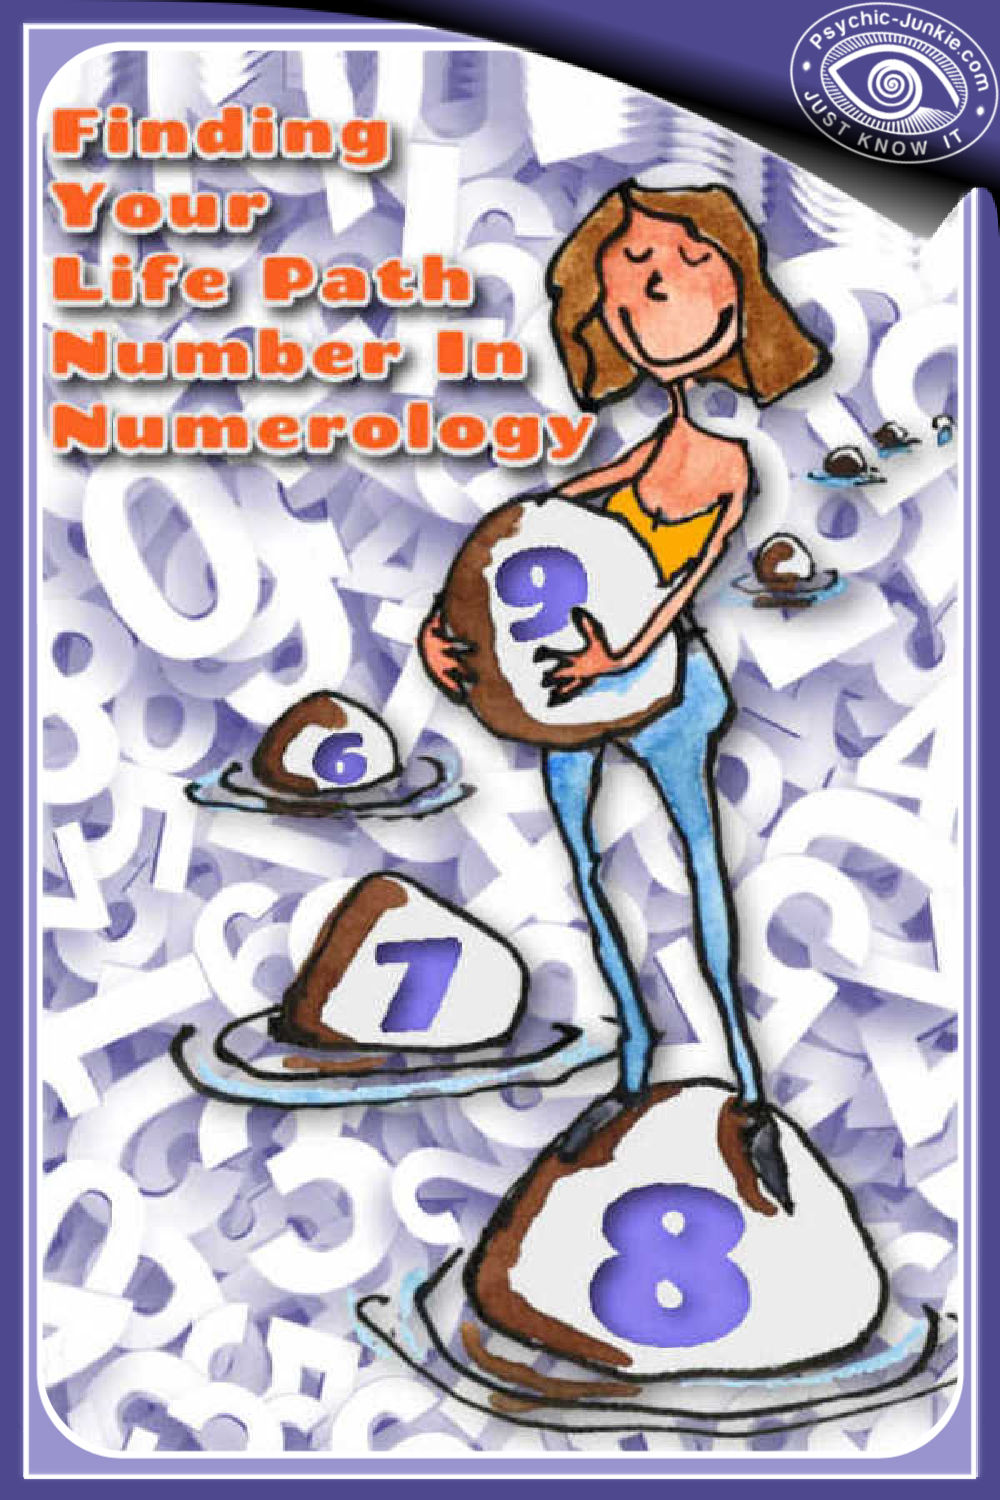 Finding your own numerology life path number and its meaning.